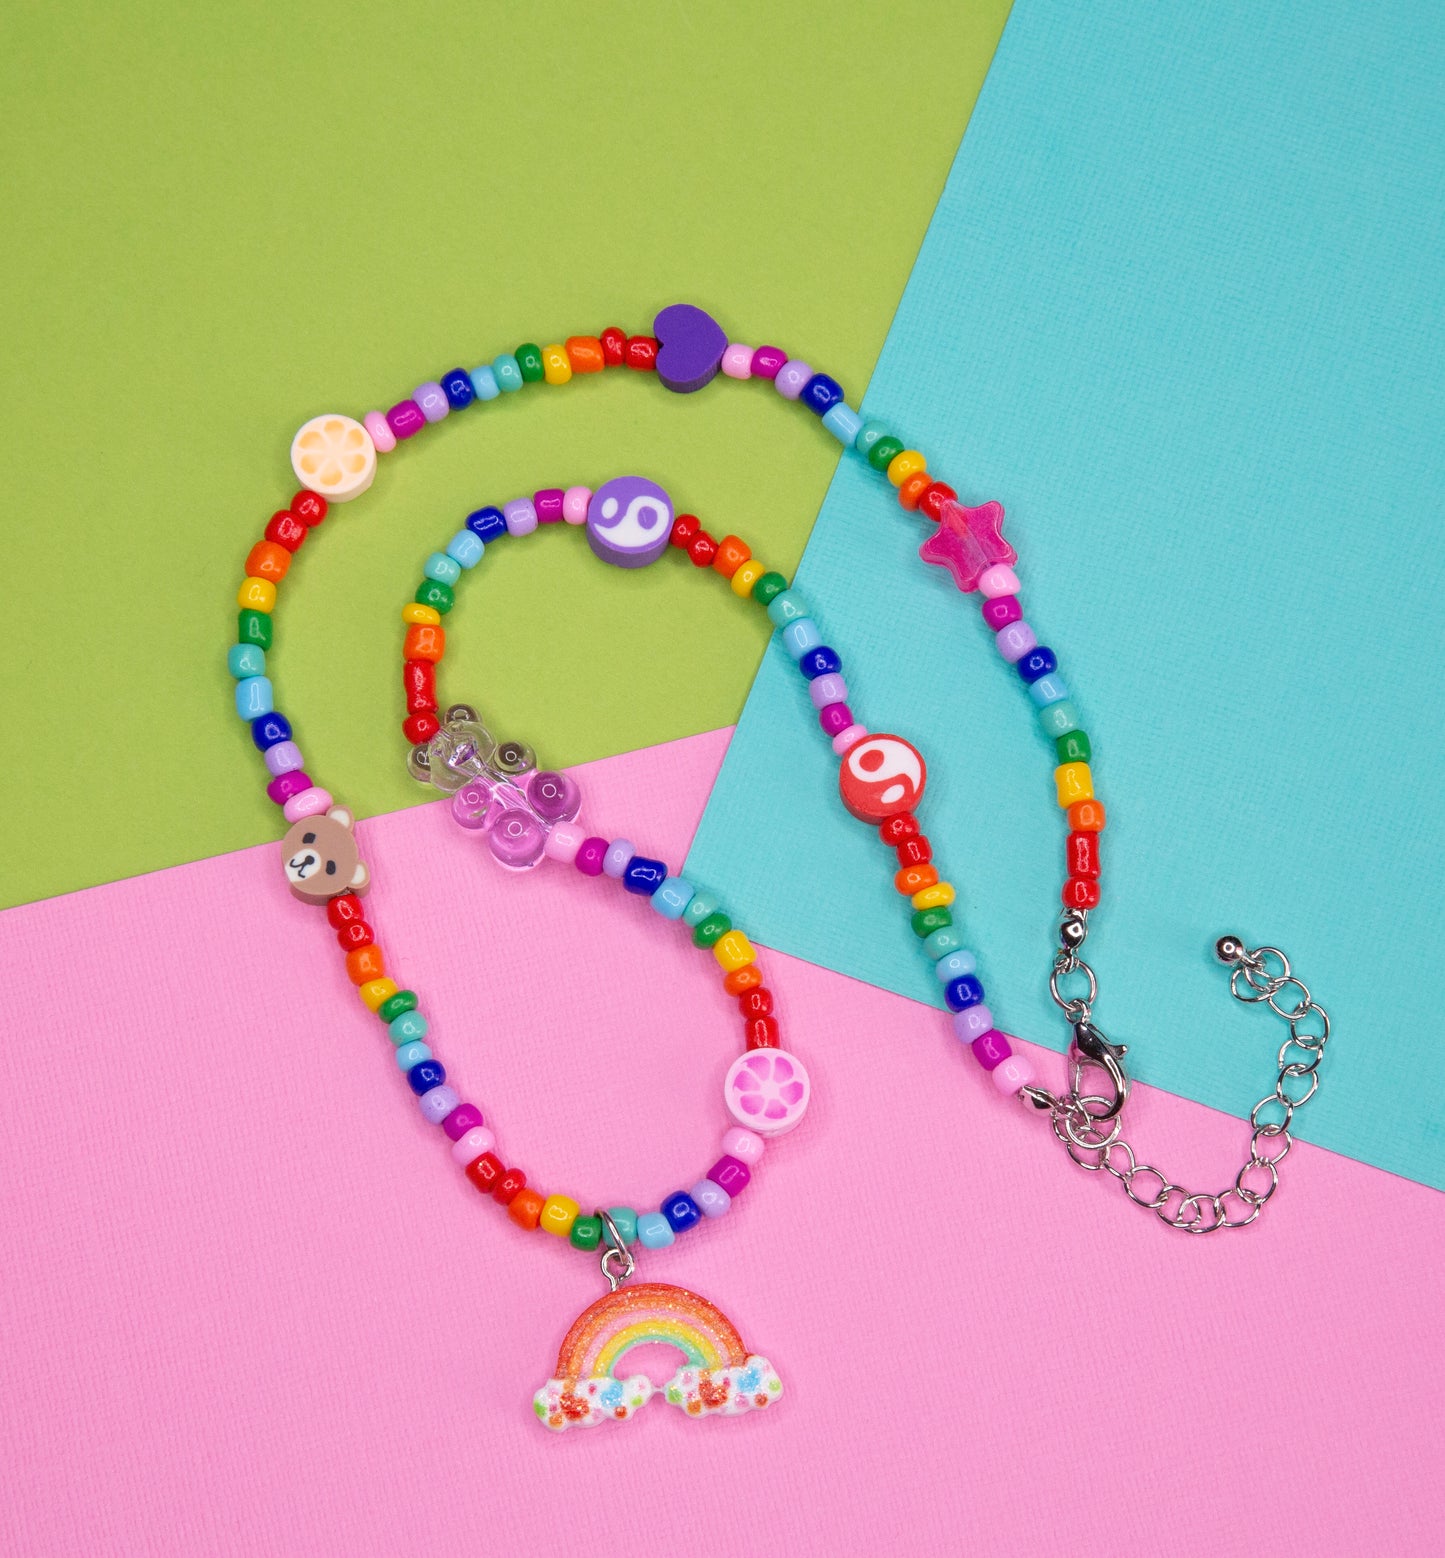 A different angle showing the rainbow teddy bear necklace 